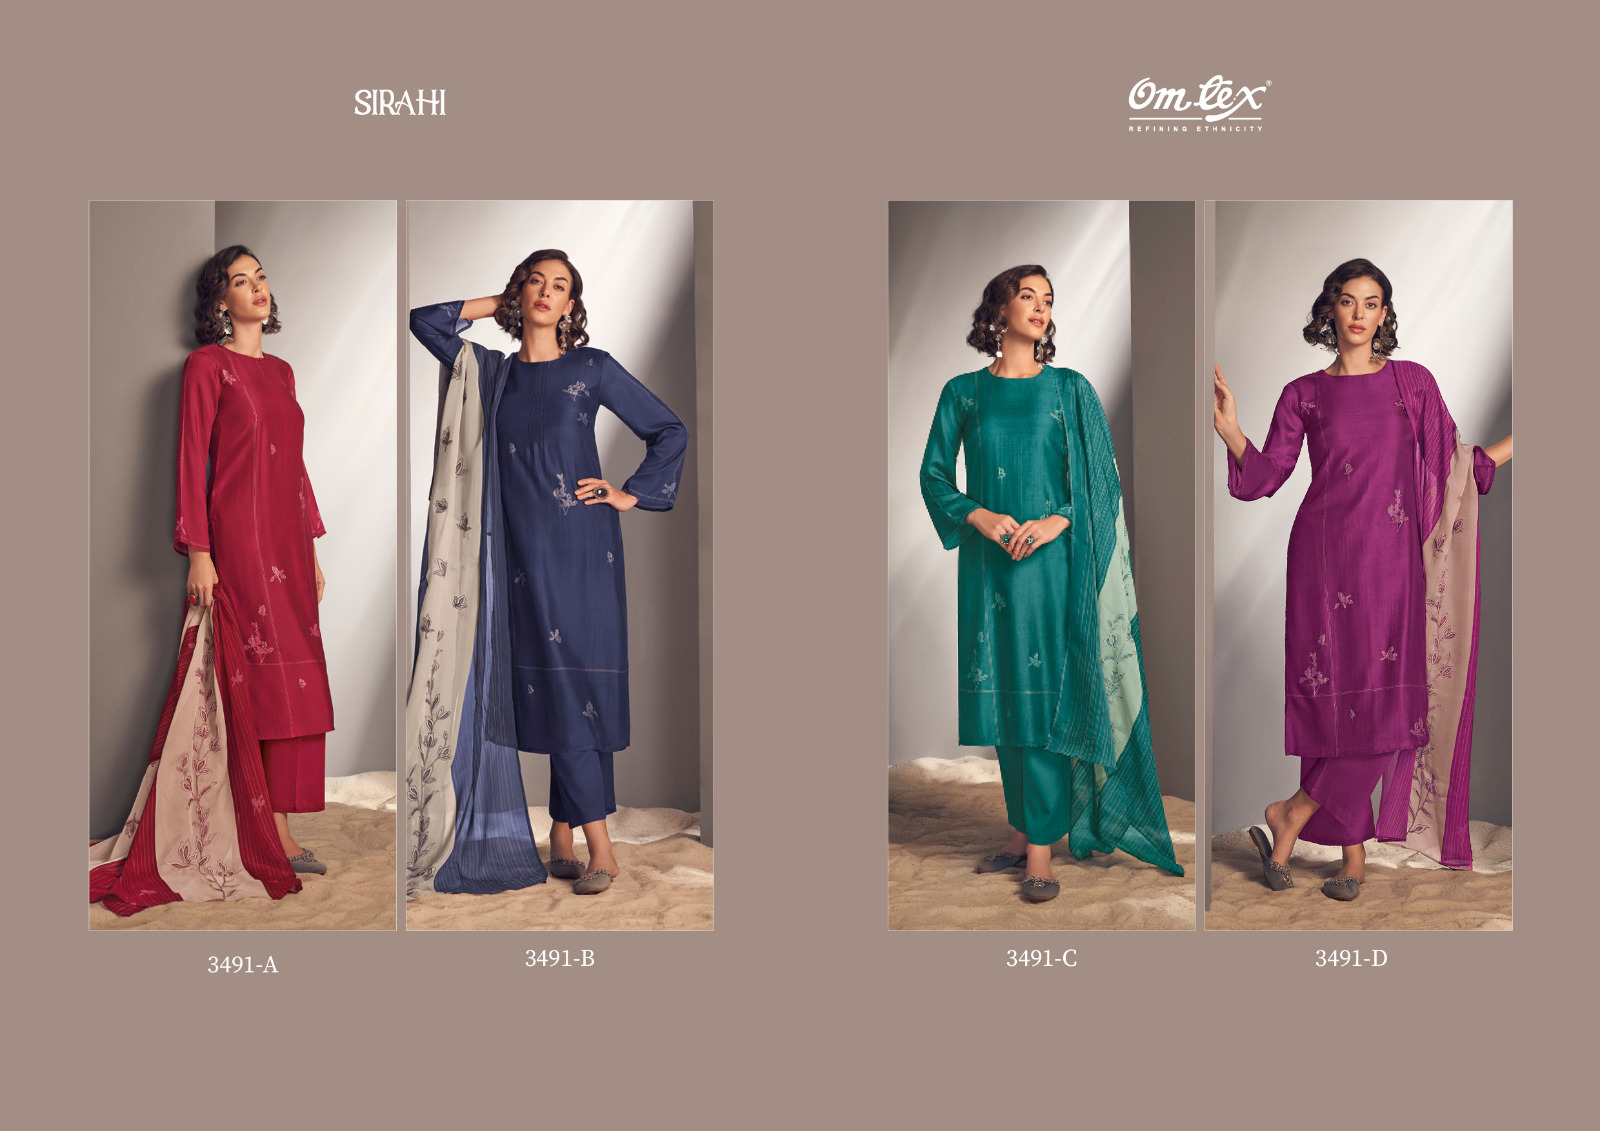 Omtex Sirathi collection 3